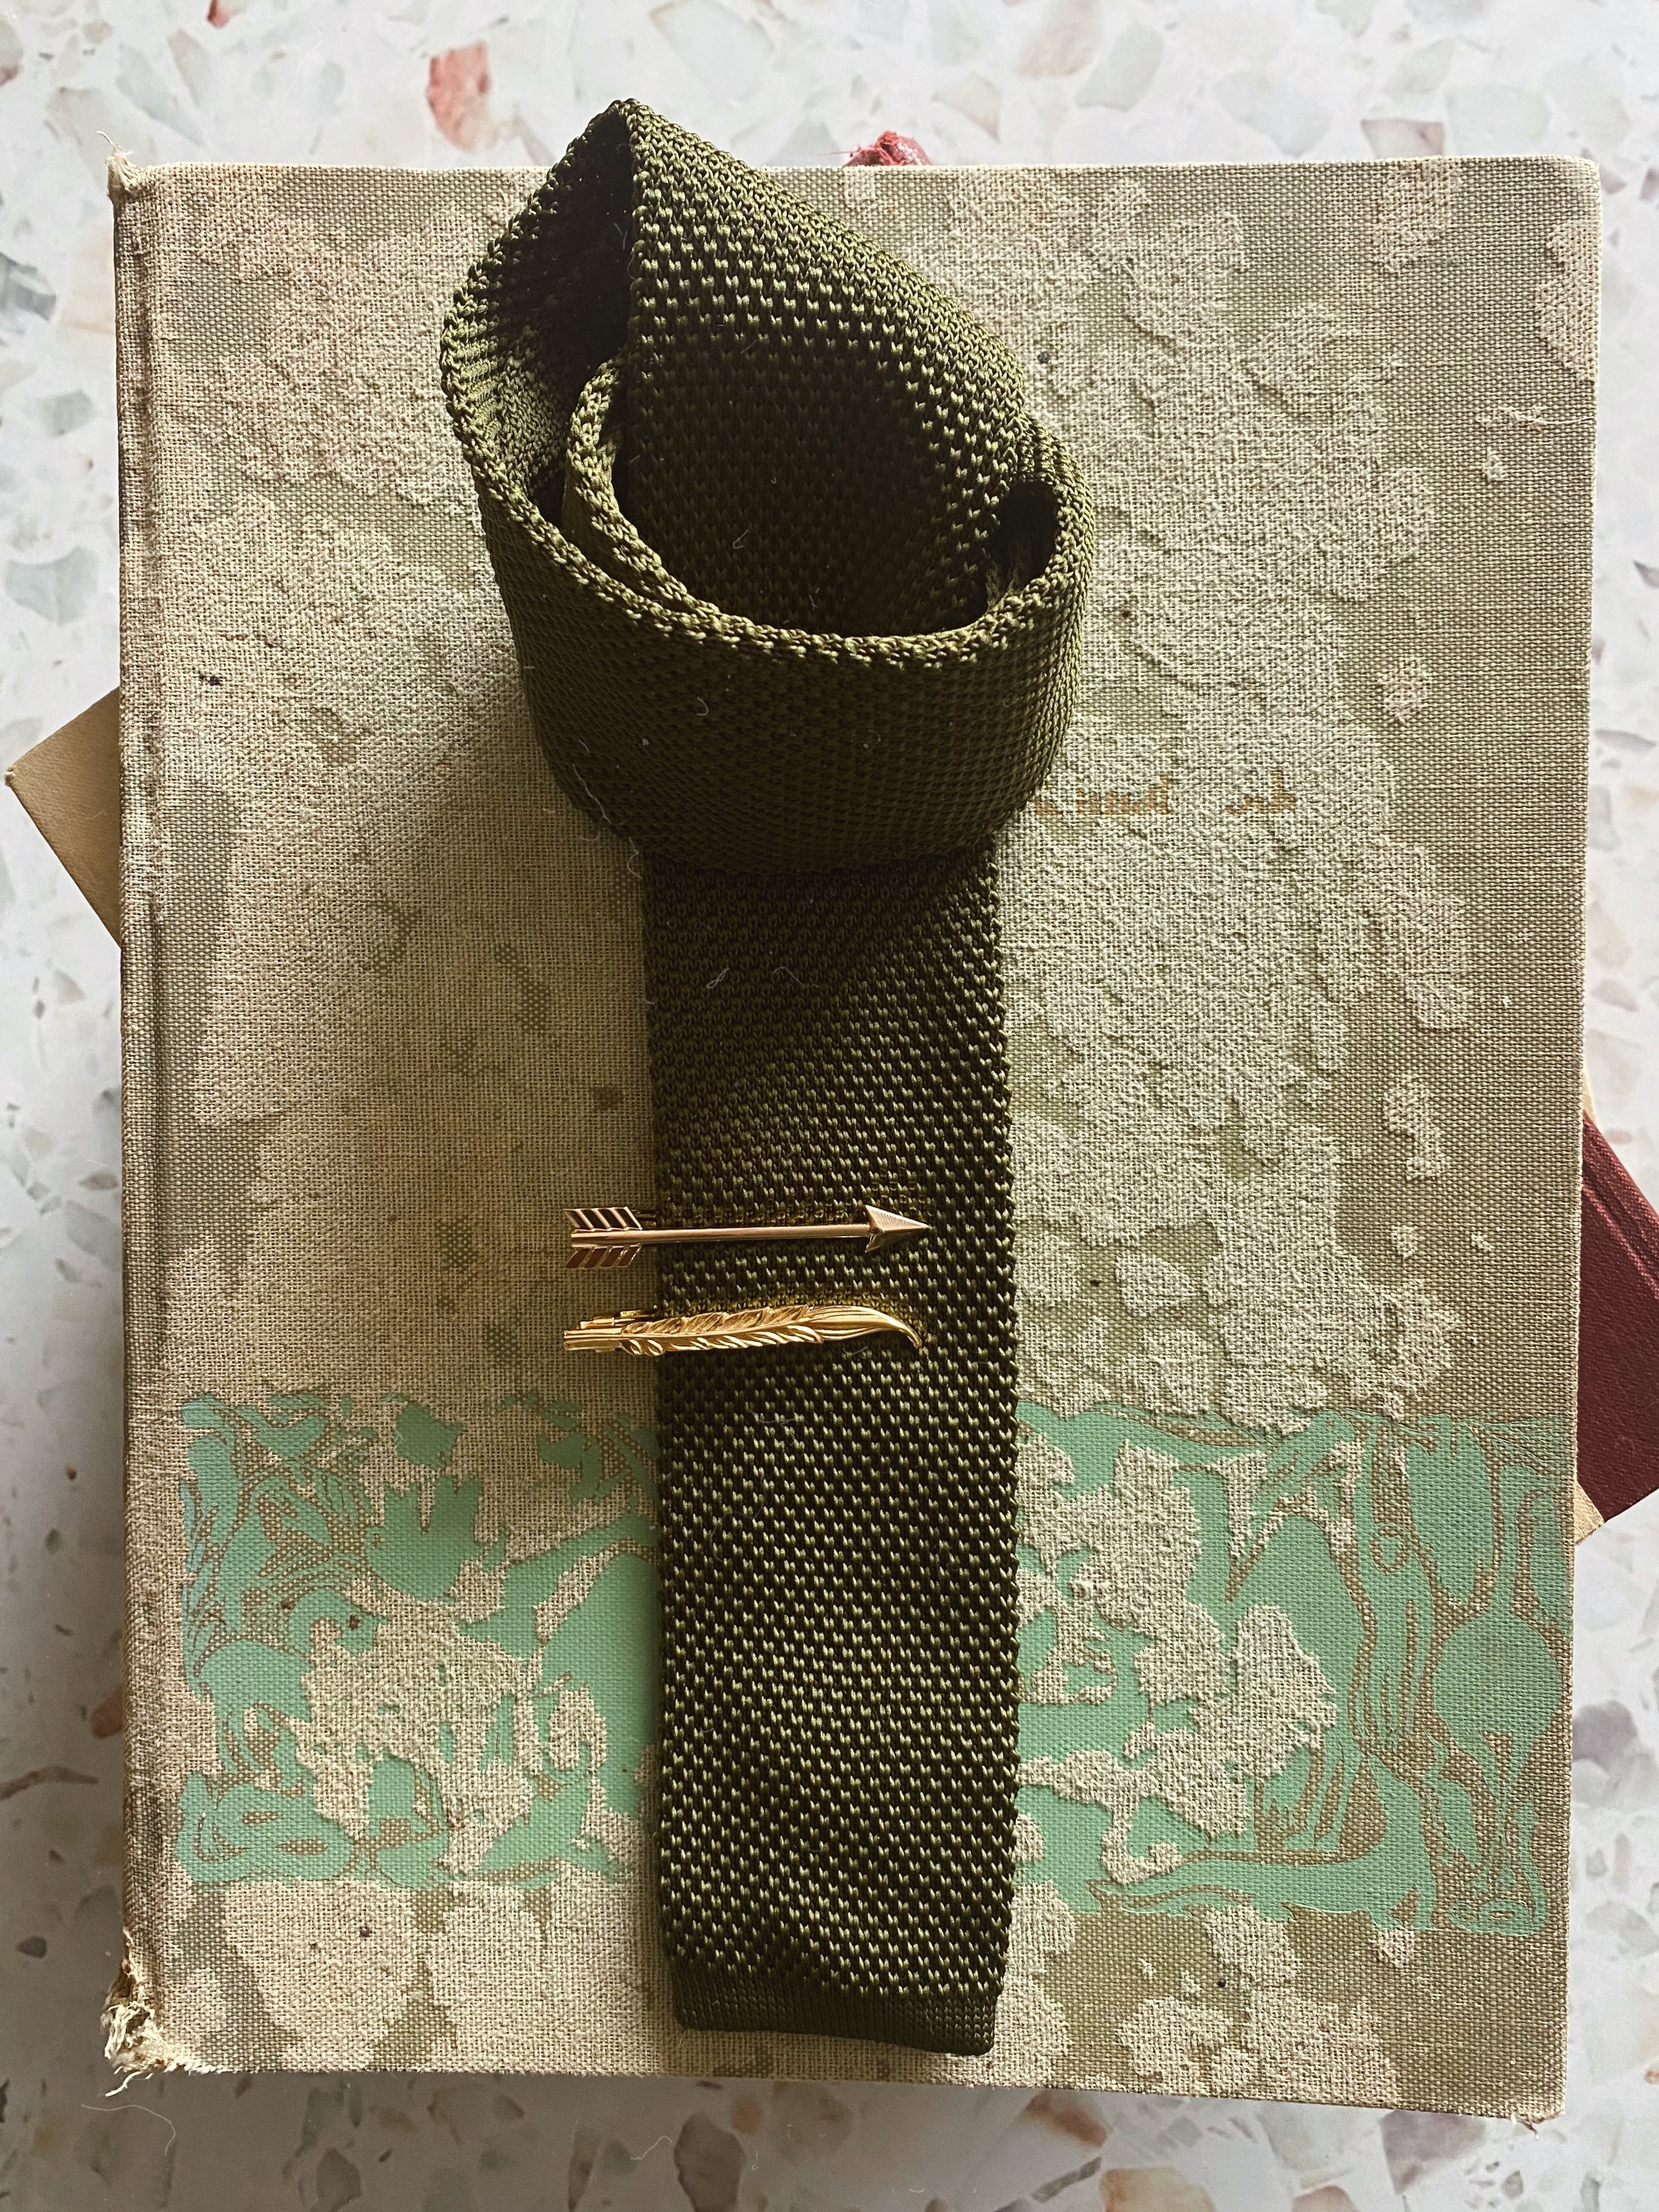 OLIVE GREEN KNITTED SKINNY TIE